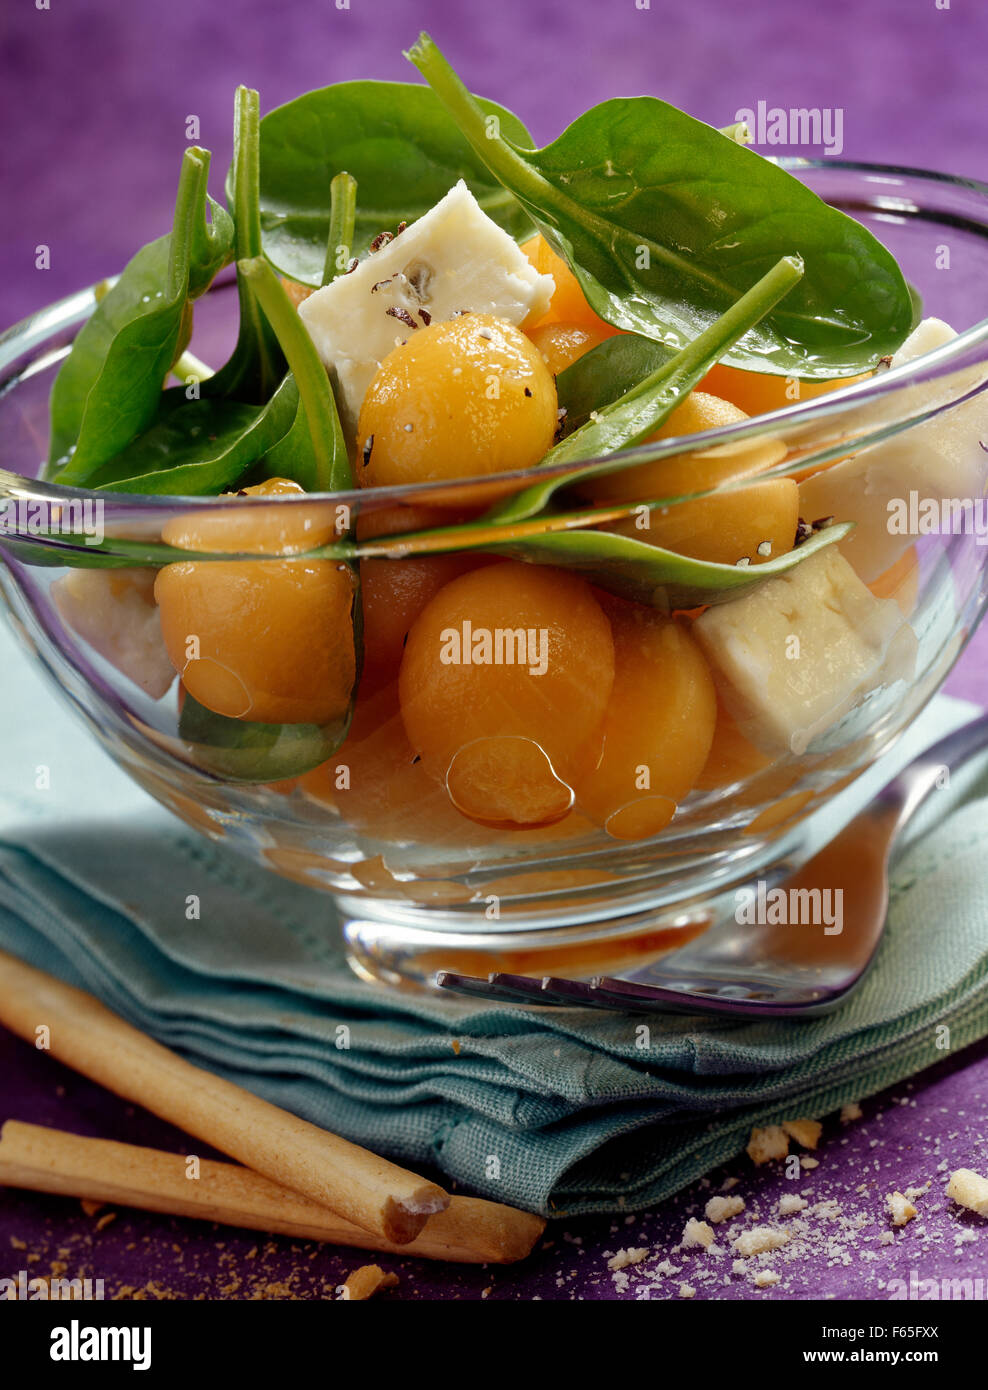 melon salad with gorgonzola and spinach shoots (topic: summer salads) Stock Photo